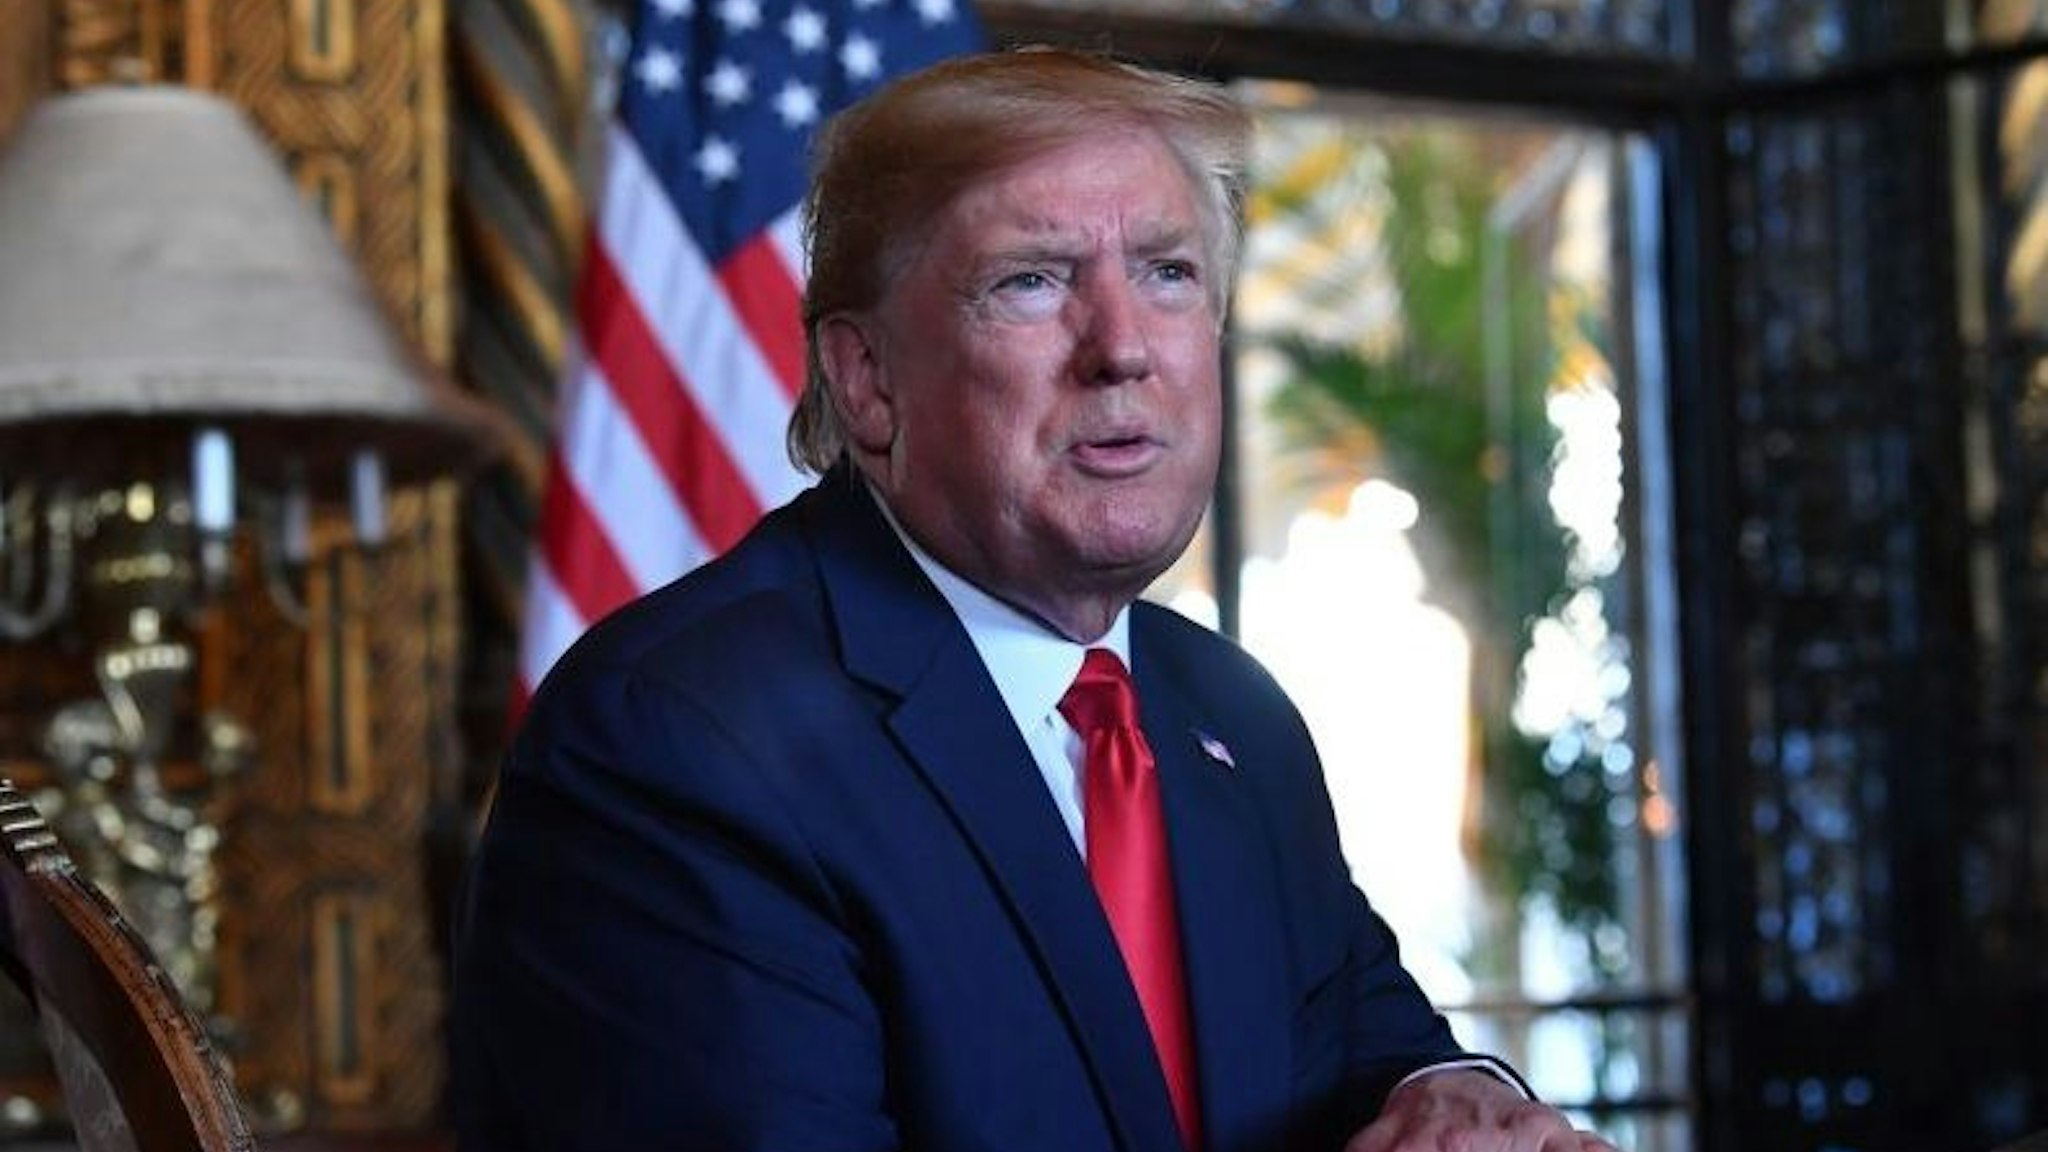 US President Donald Trump answers questions from reporters after making a video call to the troops stationed worldwide at the Mar-a-Lago estate in Palm Beach Florida, on December 24, 2019. (Photo by Nicholas Kamm / AFP)